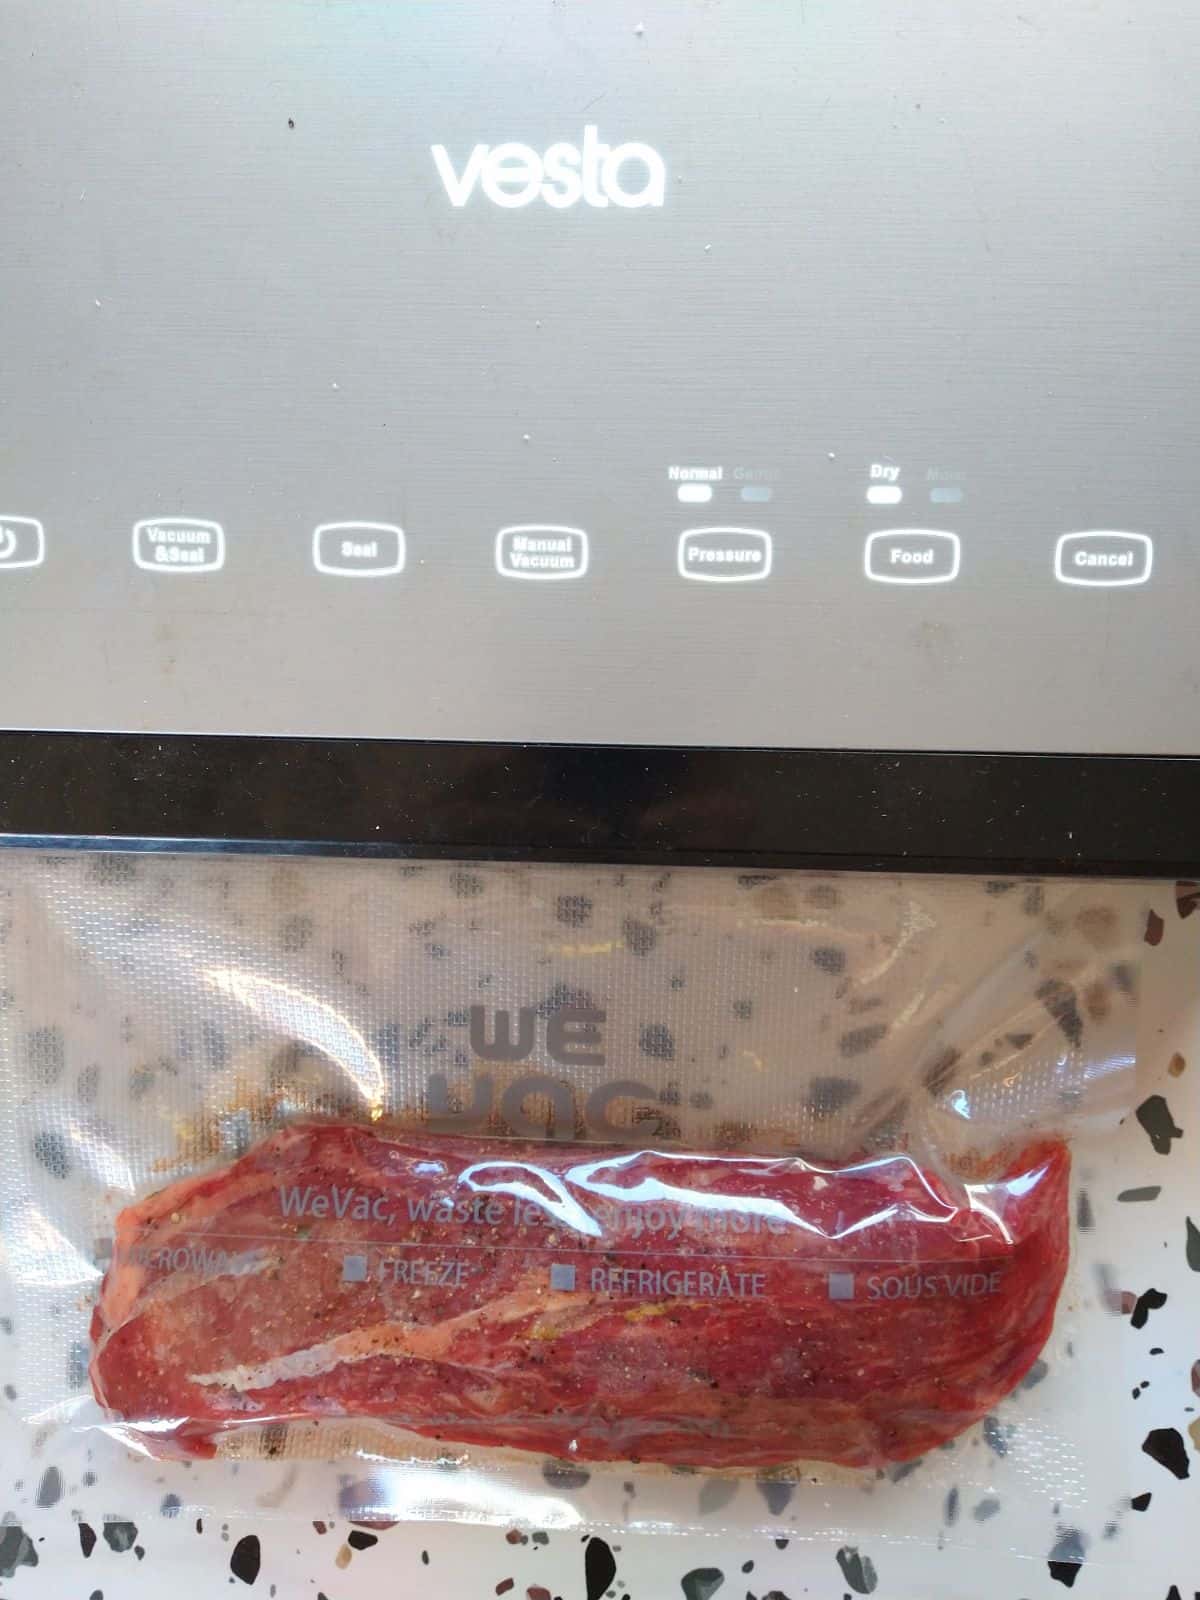 A Vesta vacuum sealer with a Teres Major steak in a bag being sealed on a table.